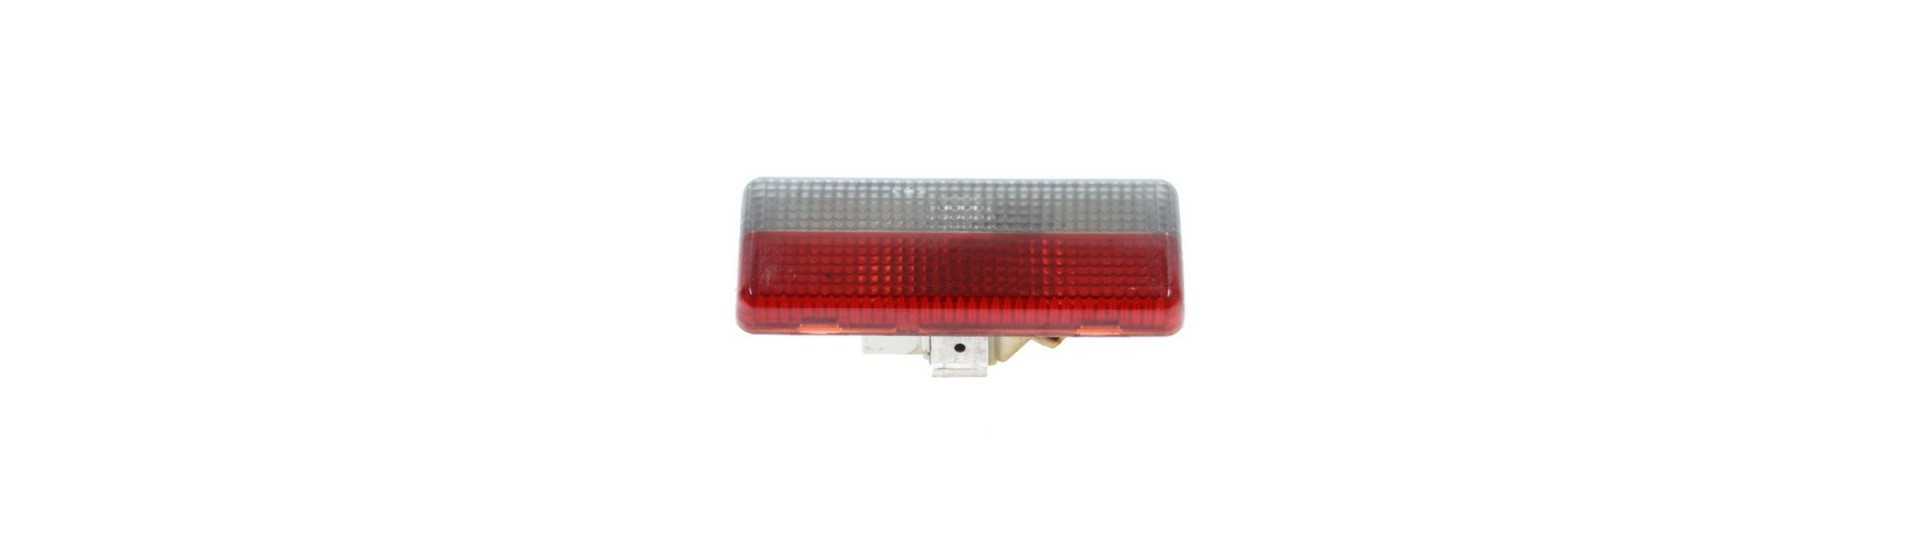 Door light at the best price for car without a permit